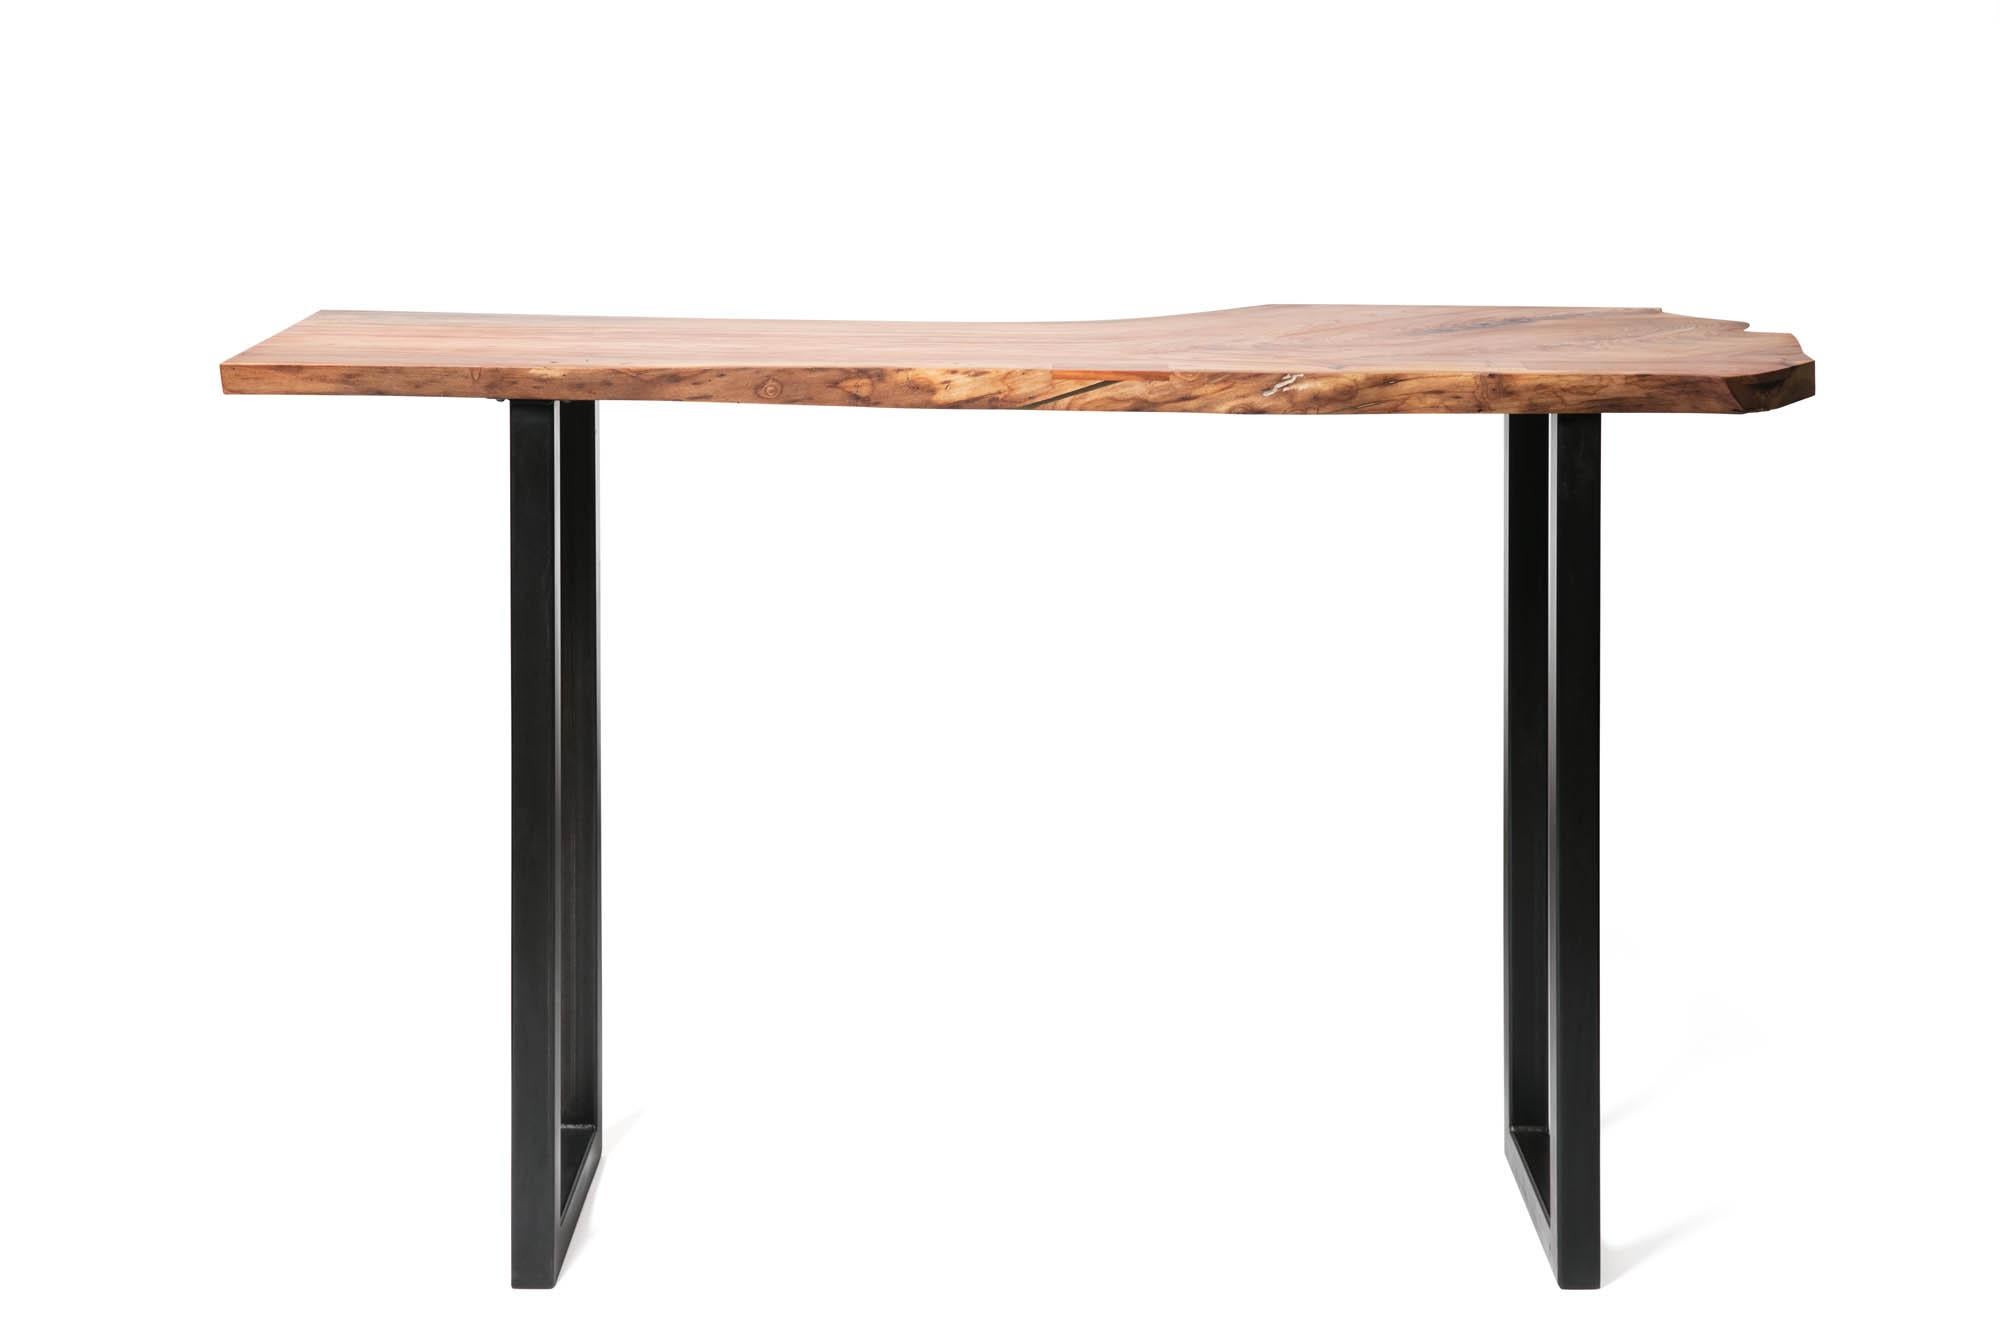 Our Live Edge Bar Height Table in Pecan Wood and Blackened Steel combines minimalist and rustic design elements.  The distinct grain of urban timber, locally harvested in Birmingham, Alabama, plays off the elegant and modern Sunrise base.  This bar